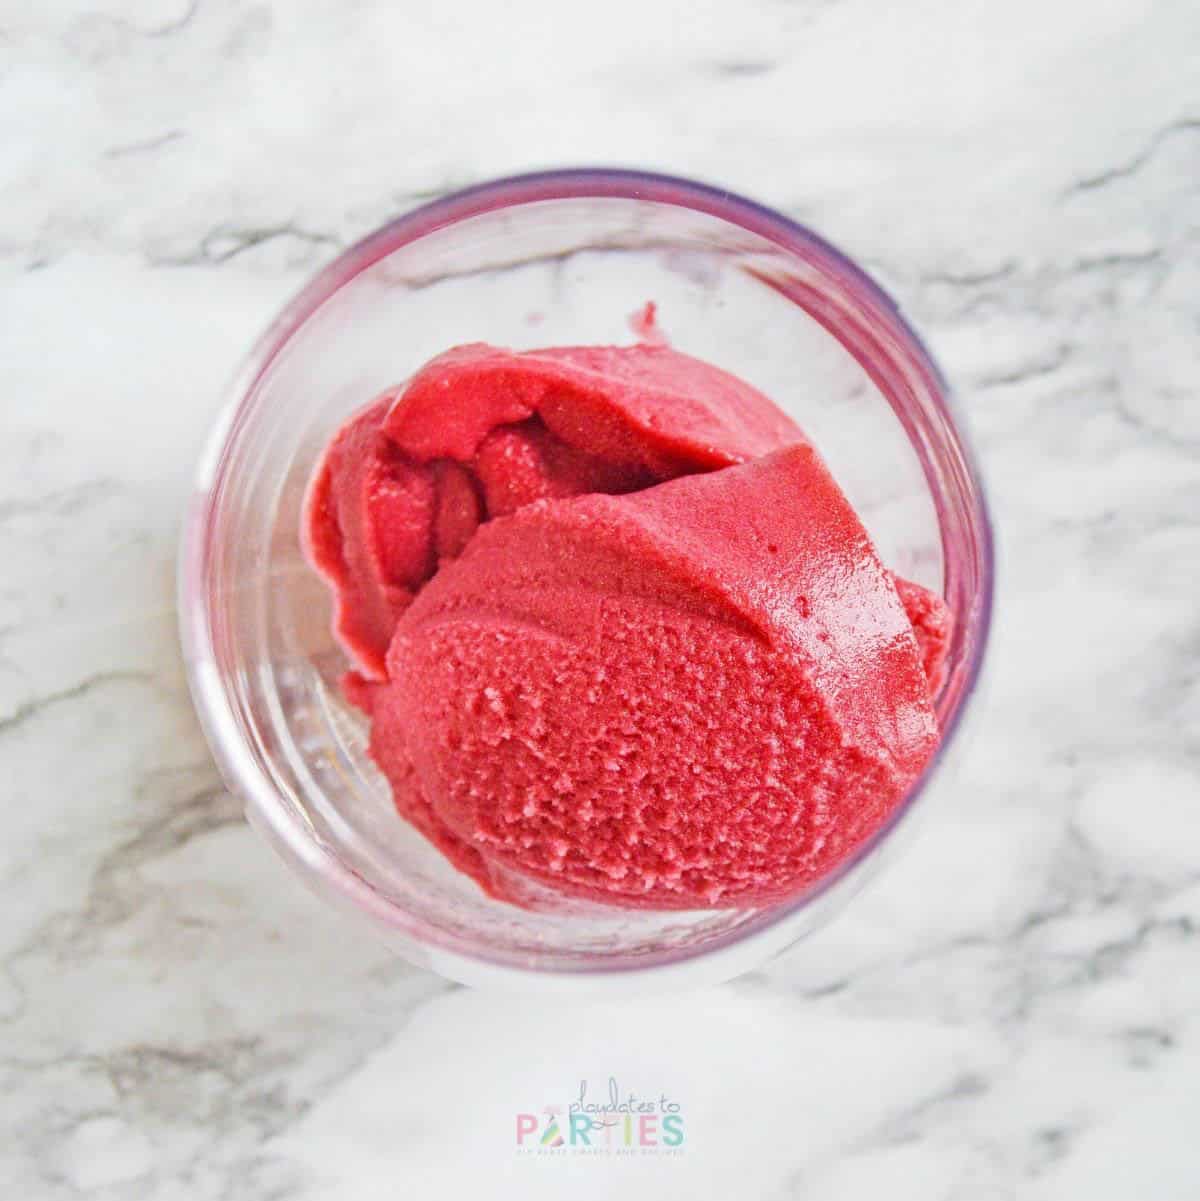 Two scoops of raspberry sorbet in a glass.